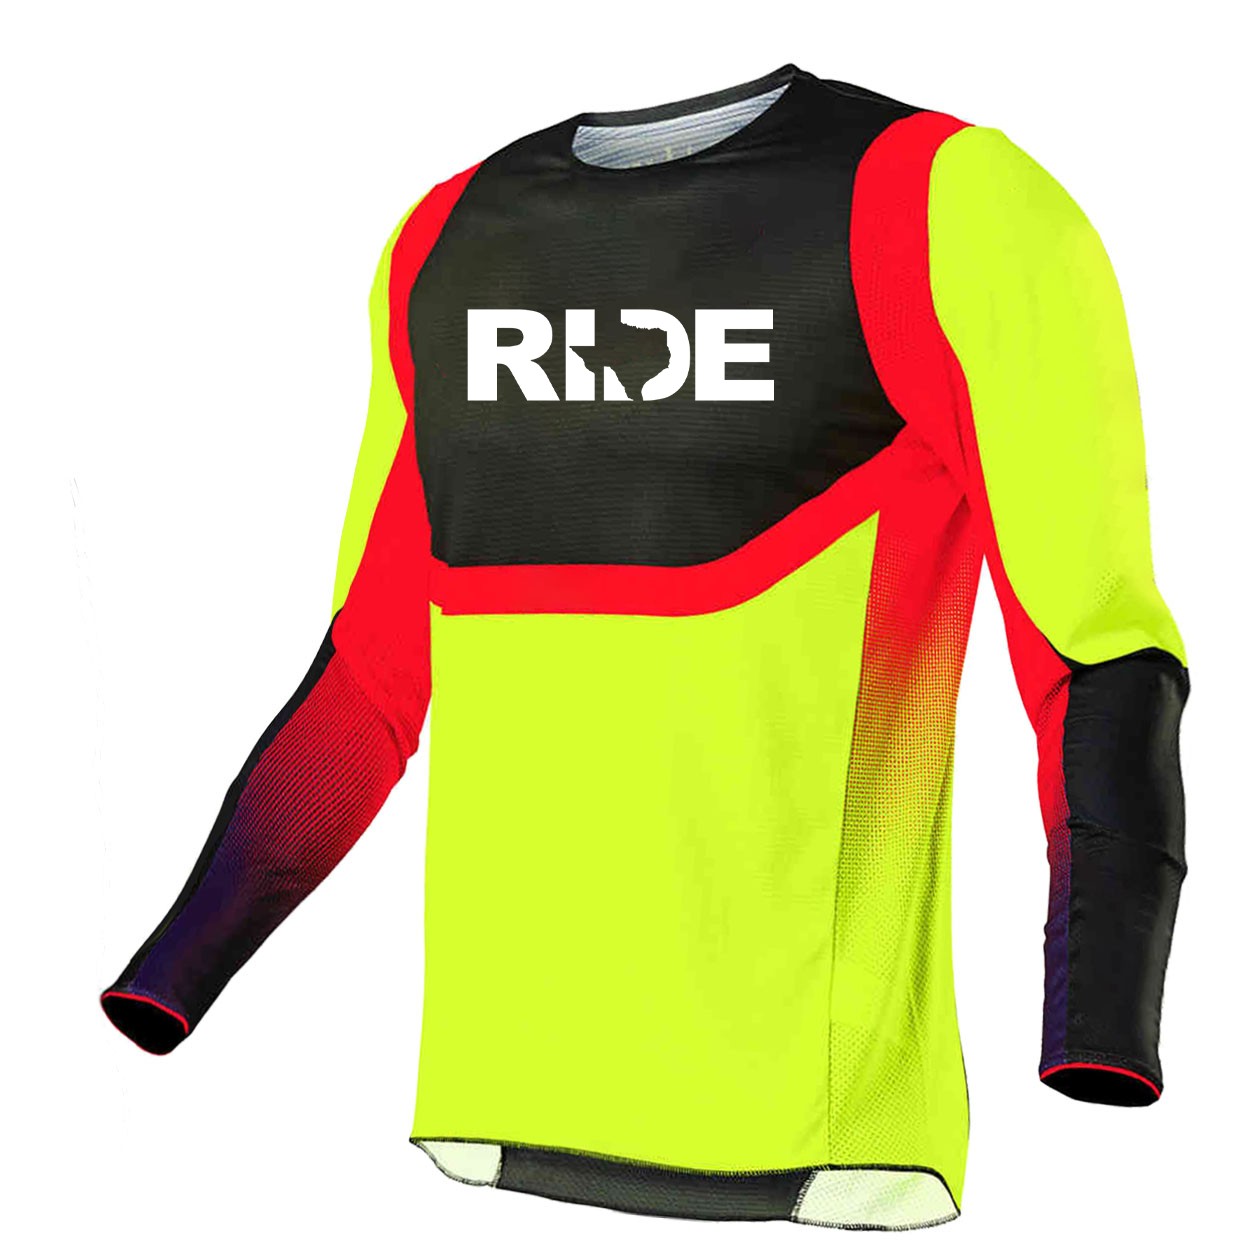 Ride Texas Classic Performance Jersey Long Sleeve Shirt Black/Yellow/Red